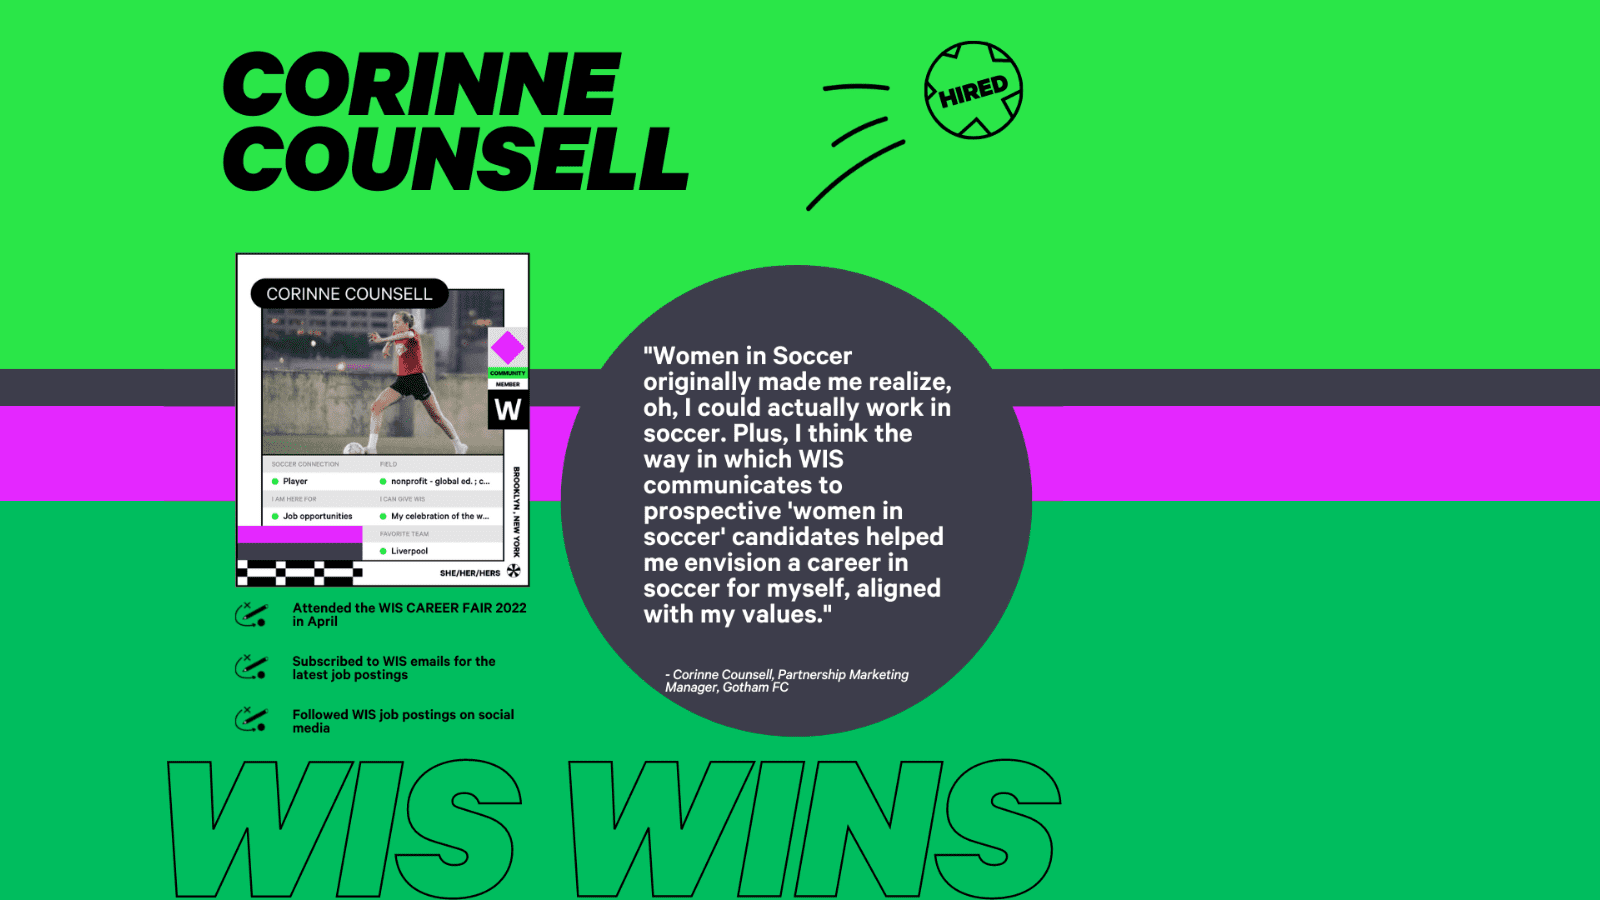 WIS WIN FOR CORINNE!